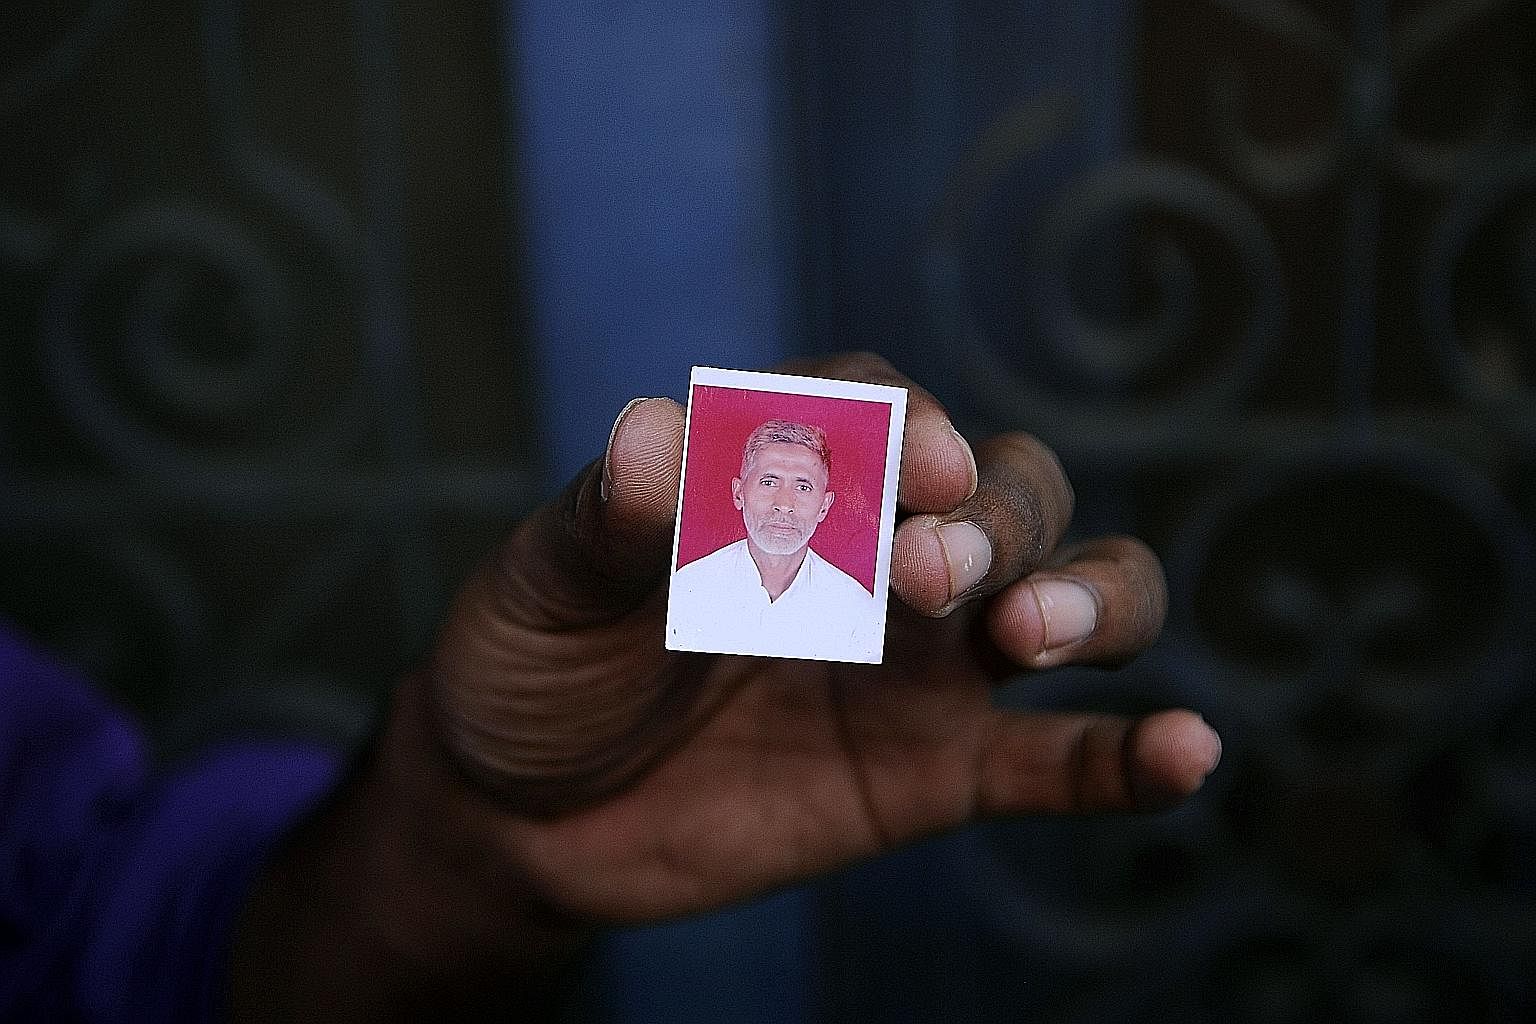 A relative shows a photograph of slain Indian villager Mohammed Akhlaq Saifi at his home in the village of Bisara, after his death in September at the hands of a mob in the northern state of Uttar Pradesh.